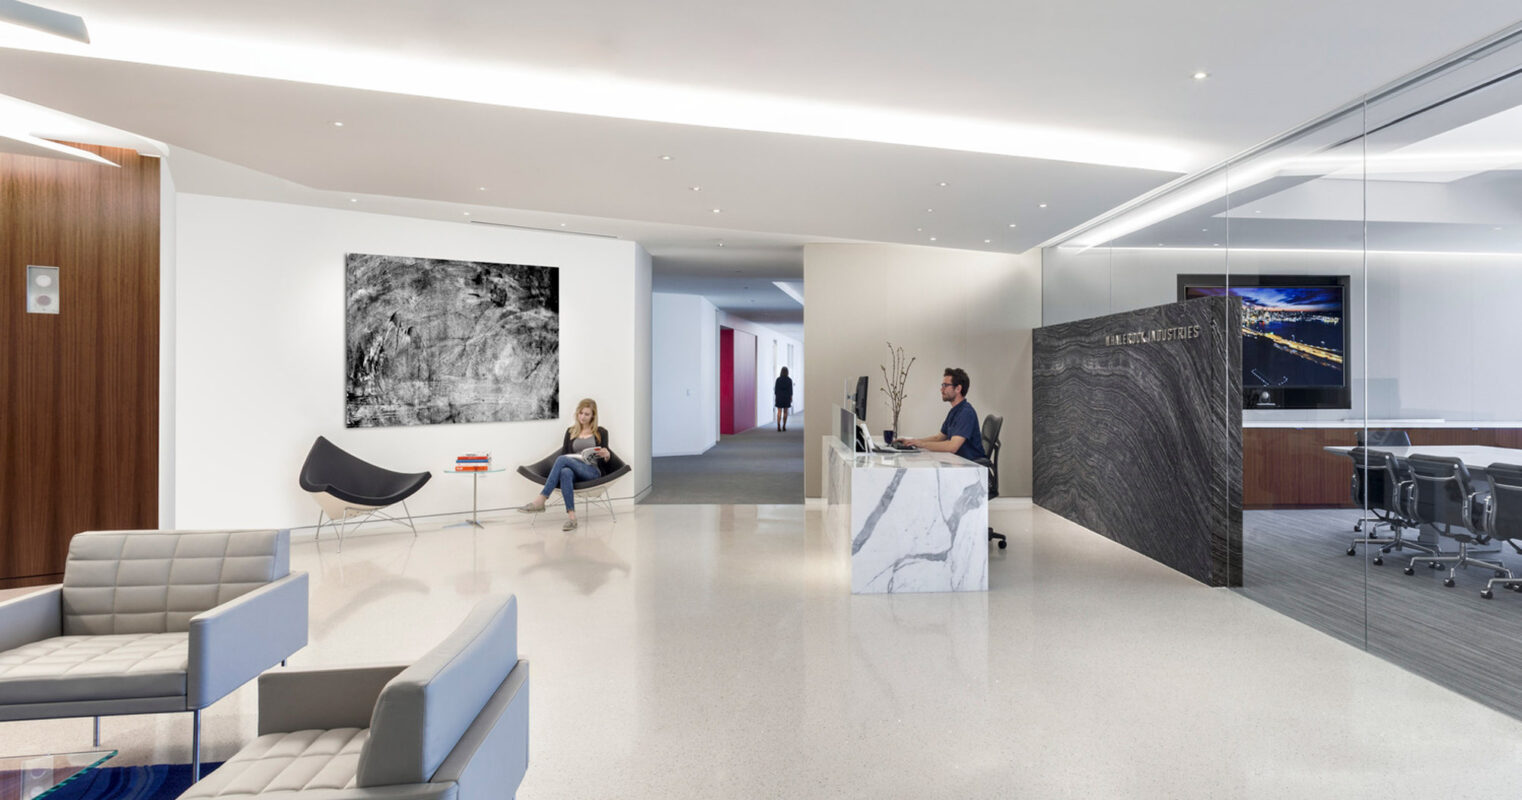 Minimalist reception area with white walls and sleek furniture, featuring a marble reception desk, abstract wall art, and a bold, sculptural chair in monochrome tones, creating a harmonious blend of modern artistry and functional design.